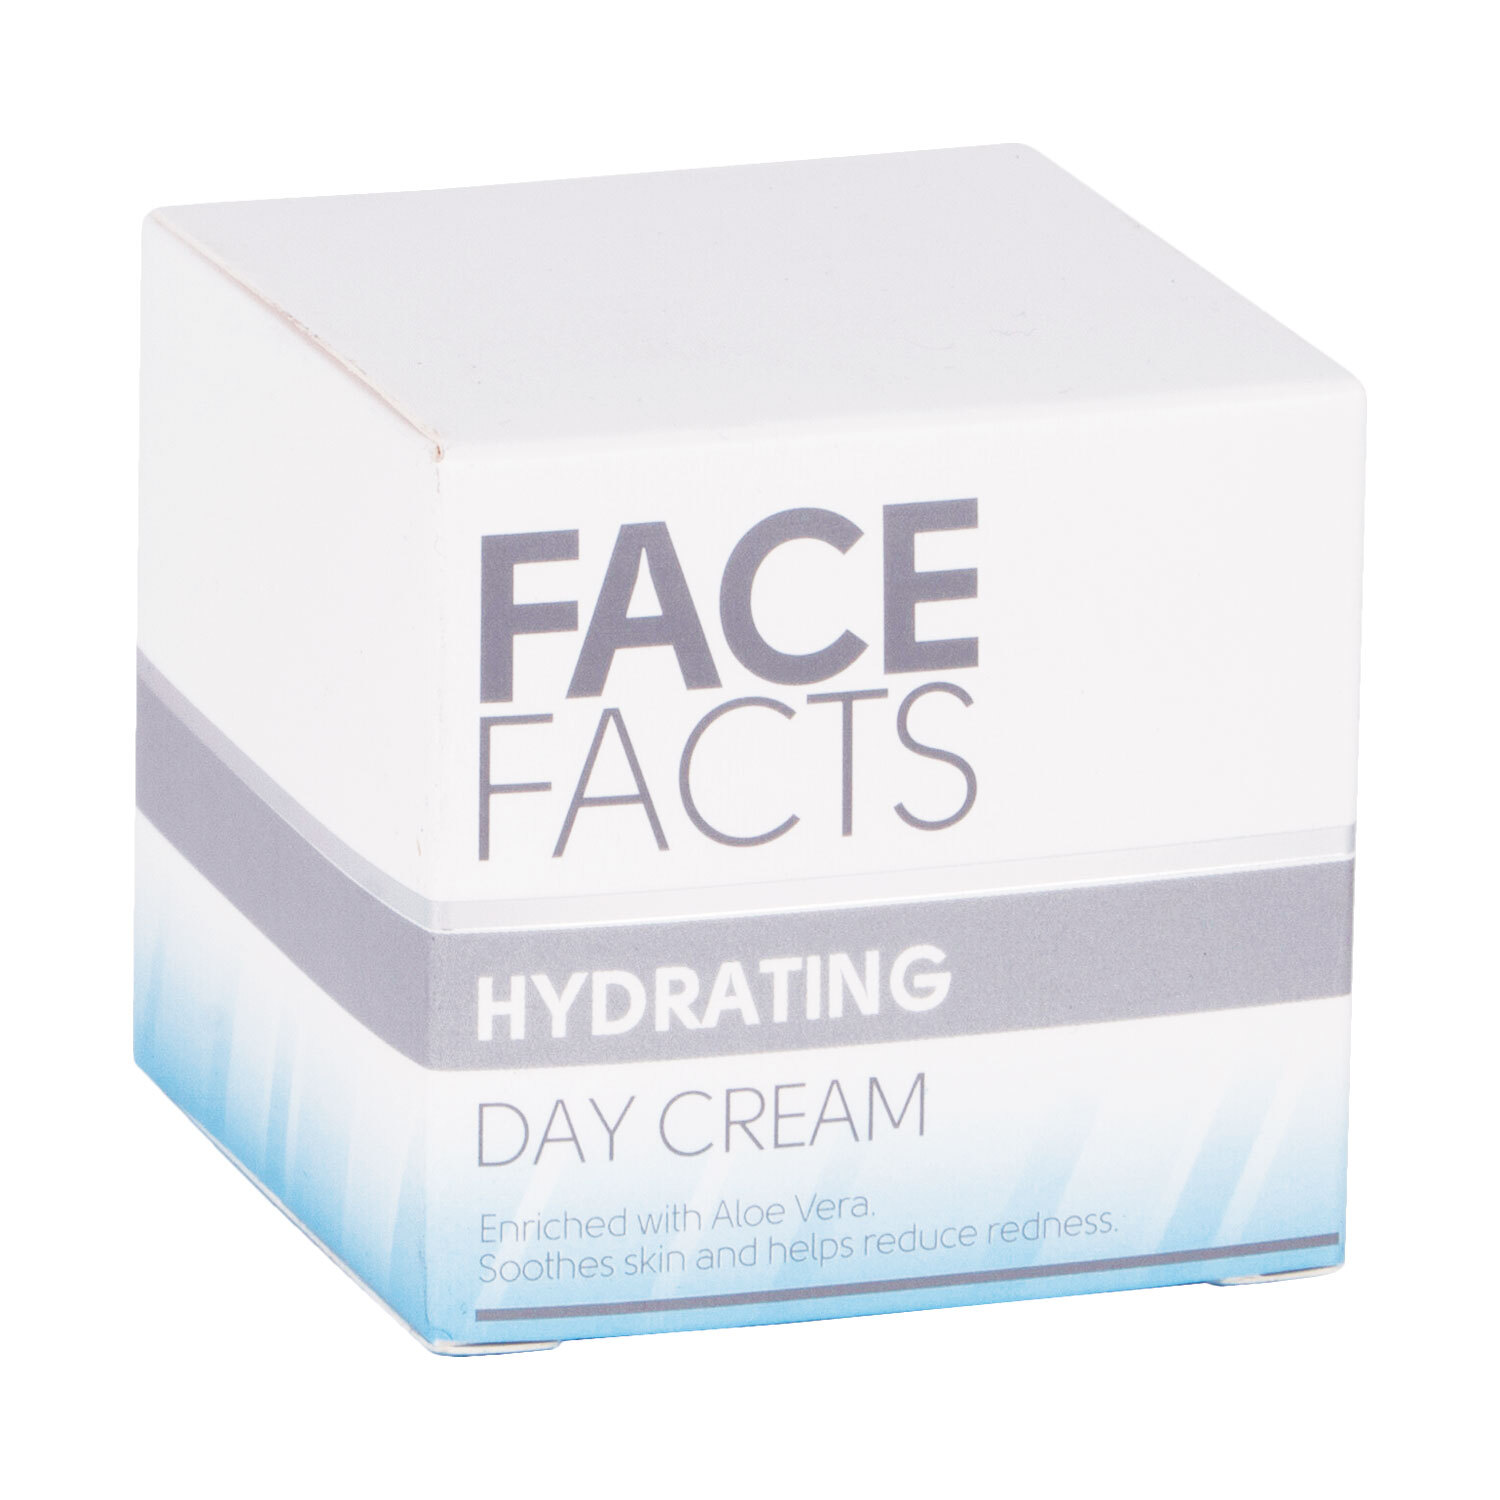 Face Facts Hydrating Day Cream Image